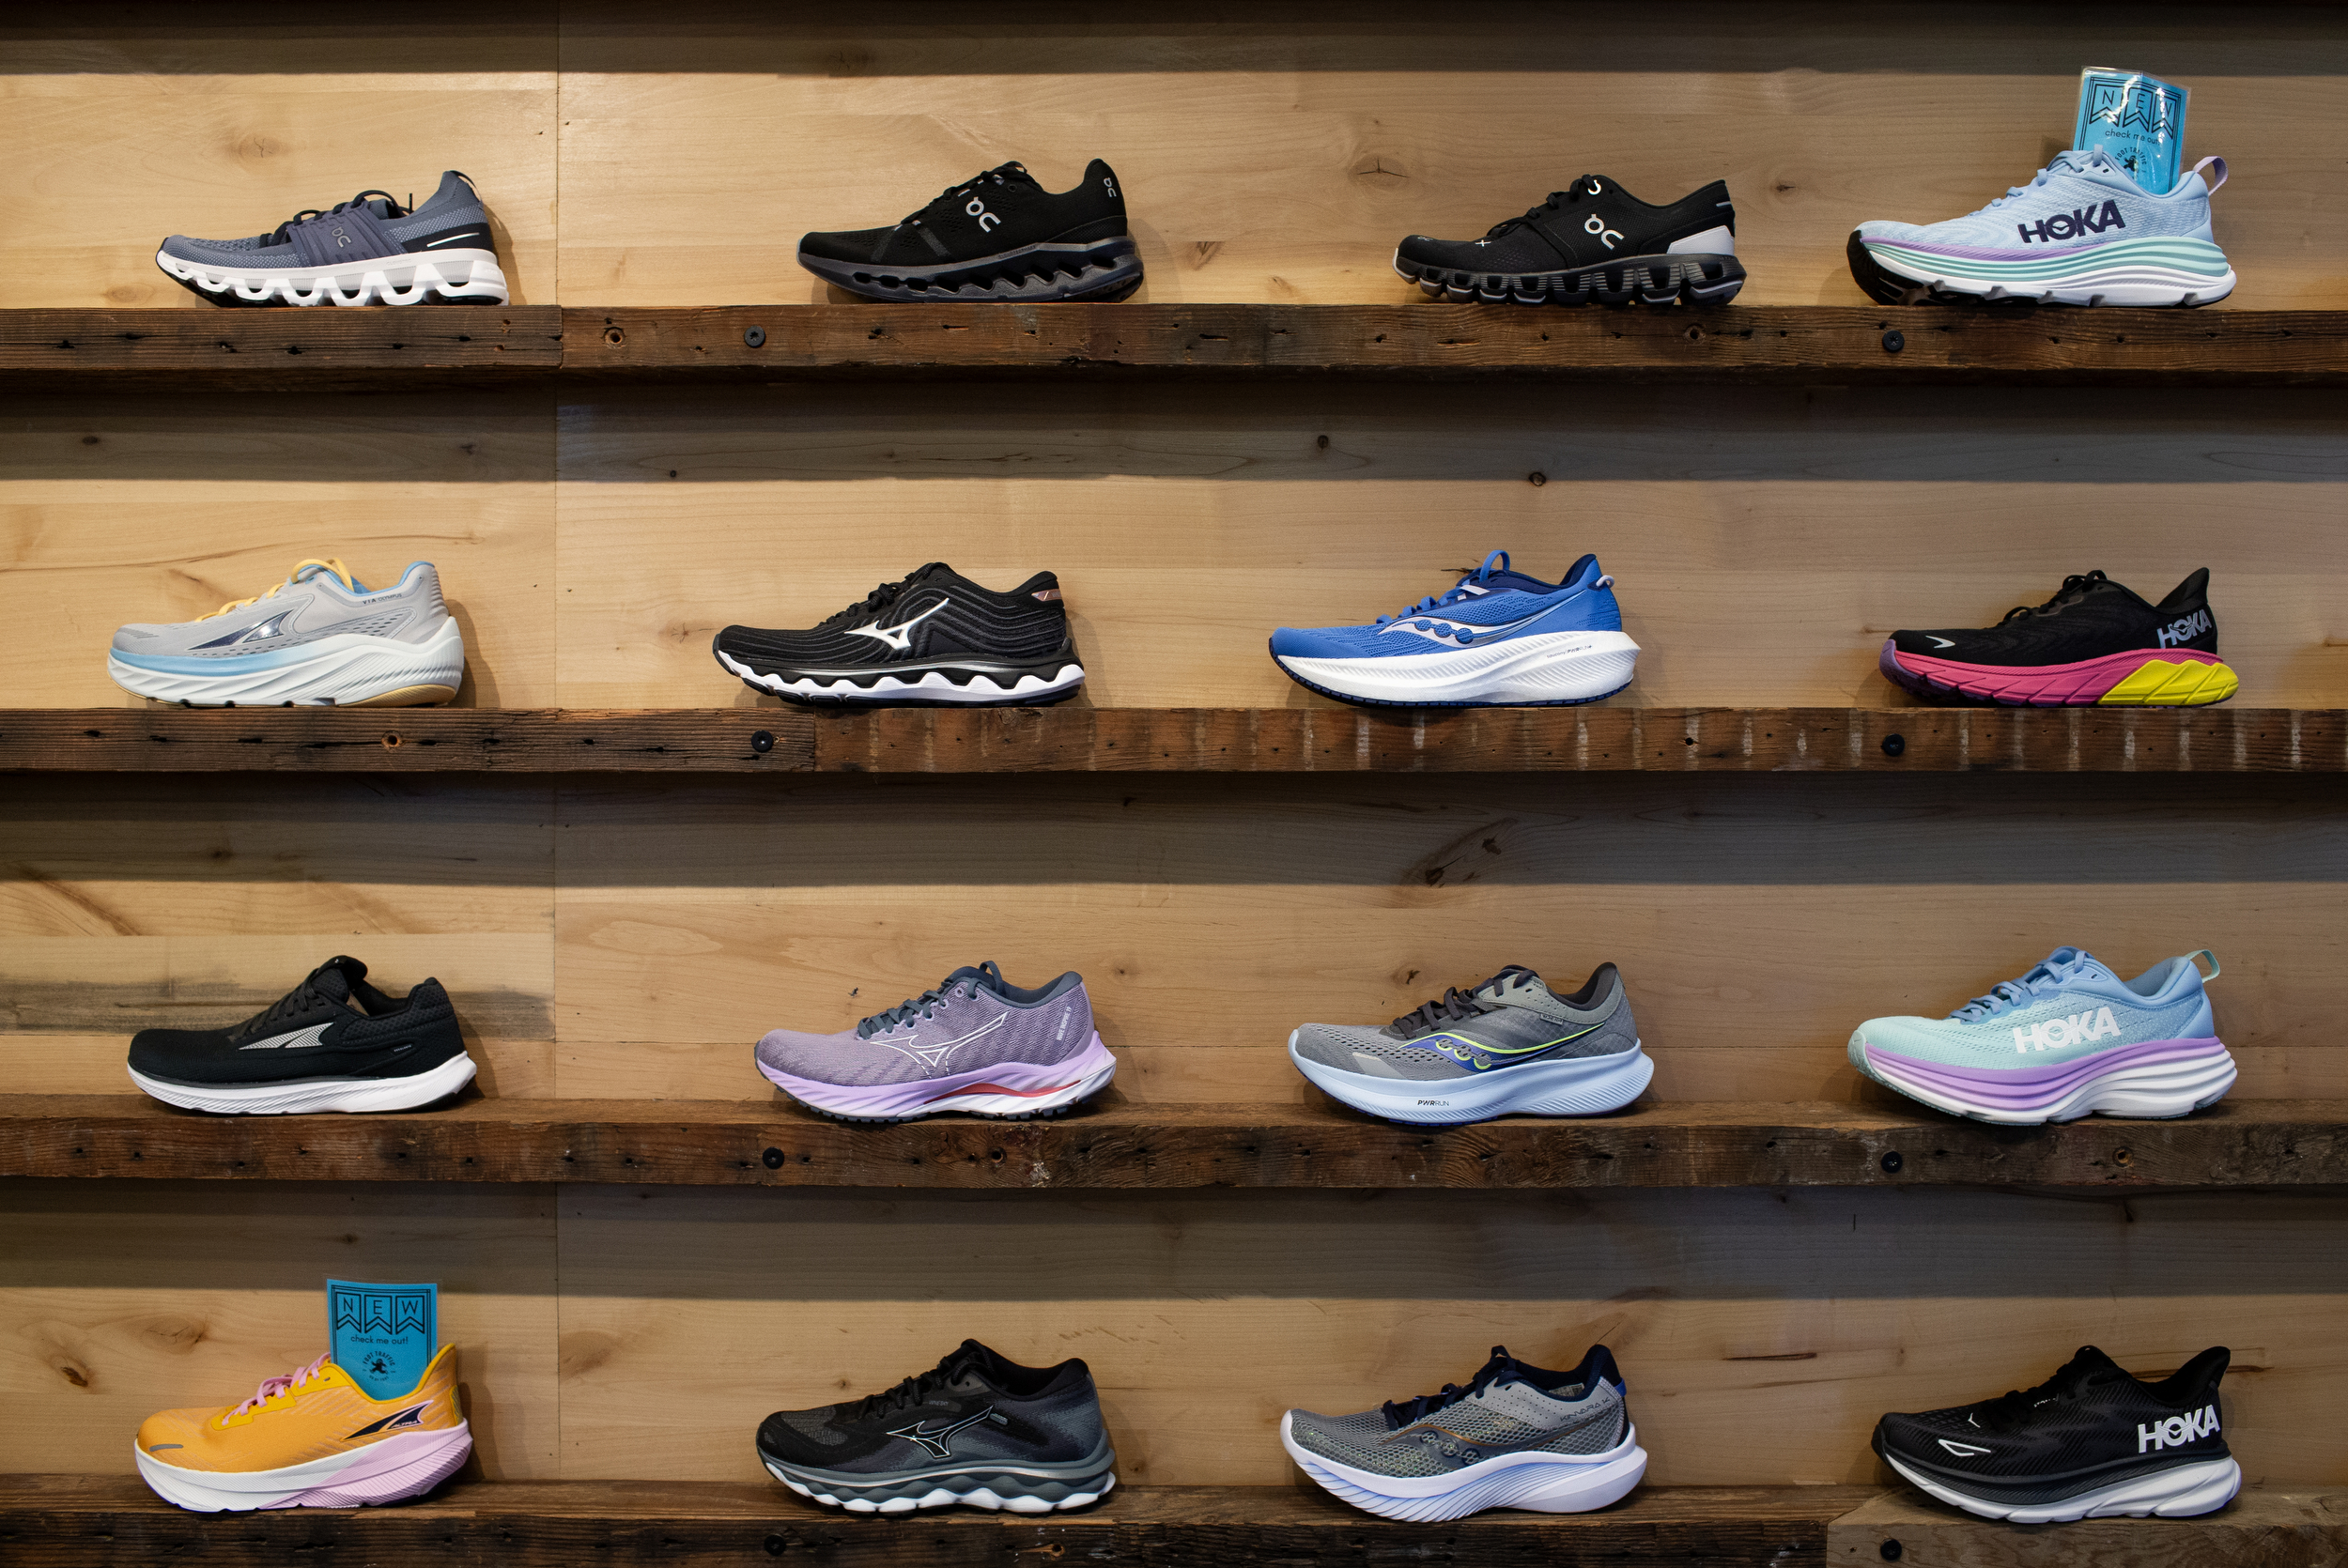 Nike's shoes are setting records, but casual runners are wearing